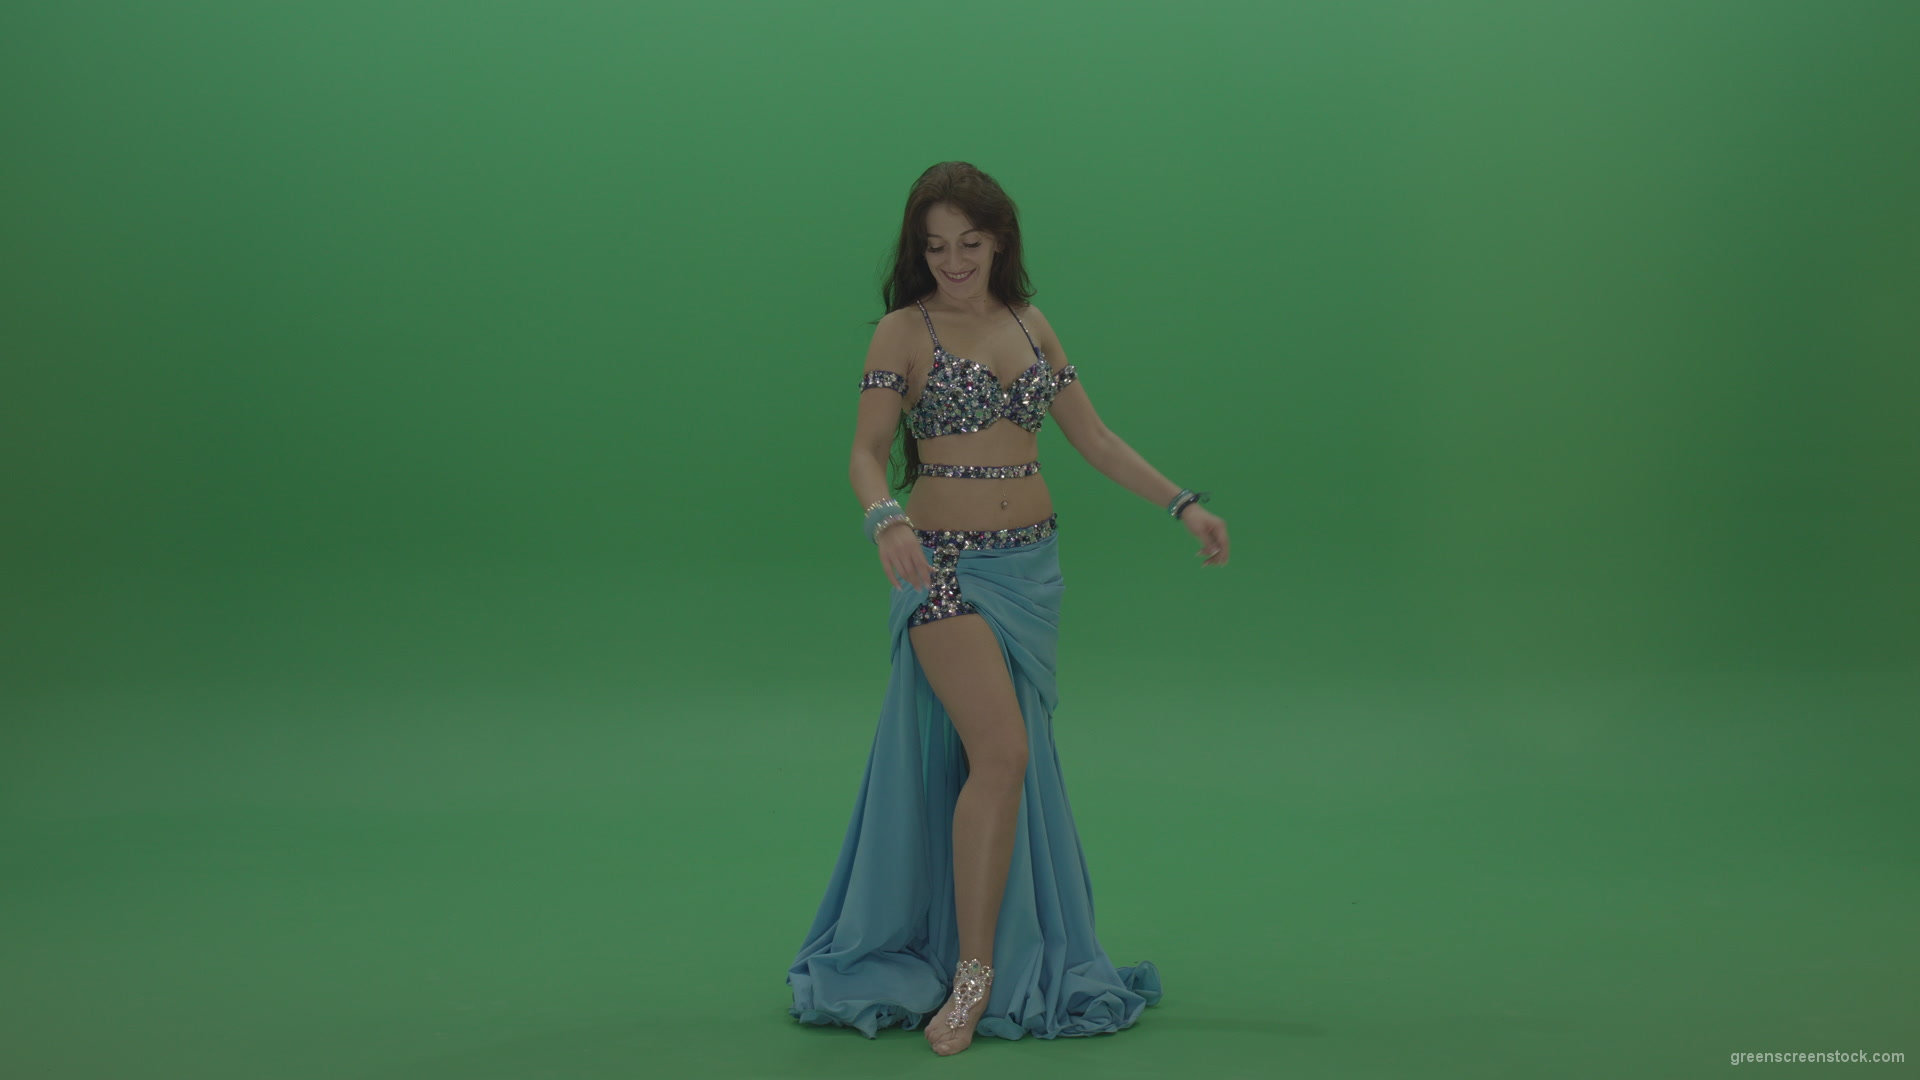 Awesome-belly-dancer-in-blue-wear-display-amazing-dance-moves-over-chromakey-background_001 Green Screen Stock